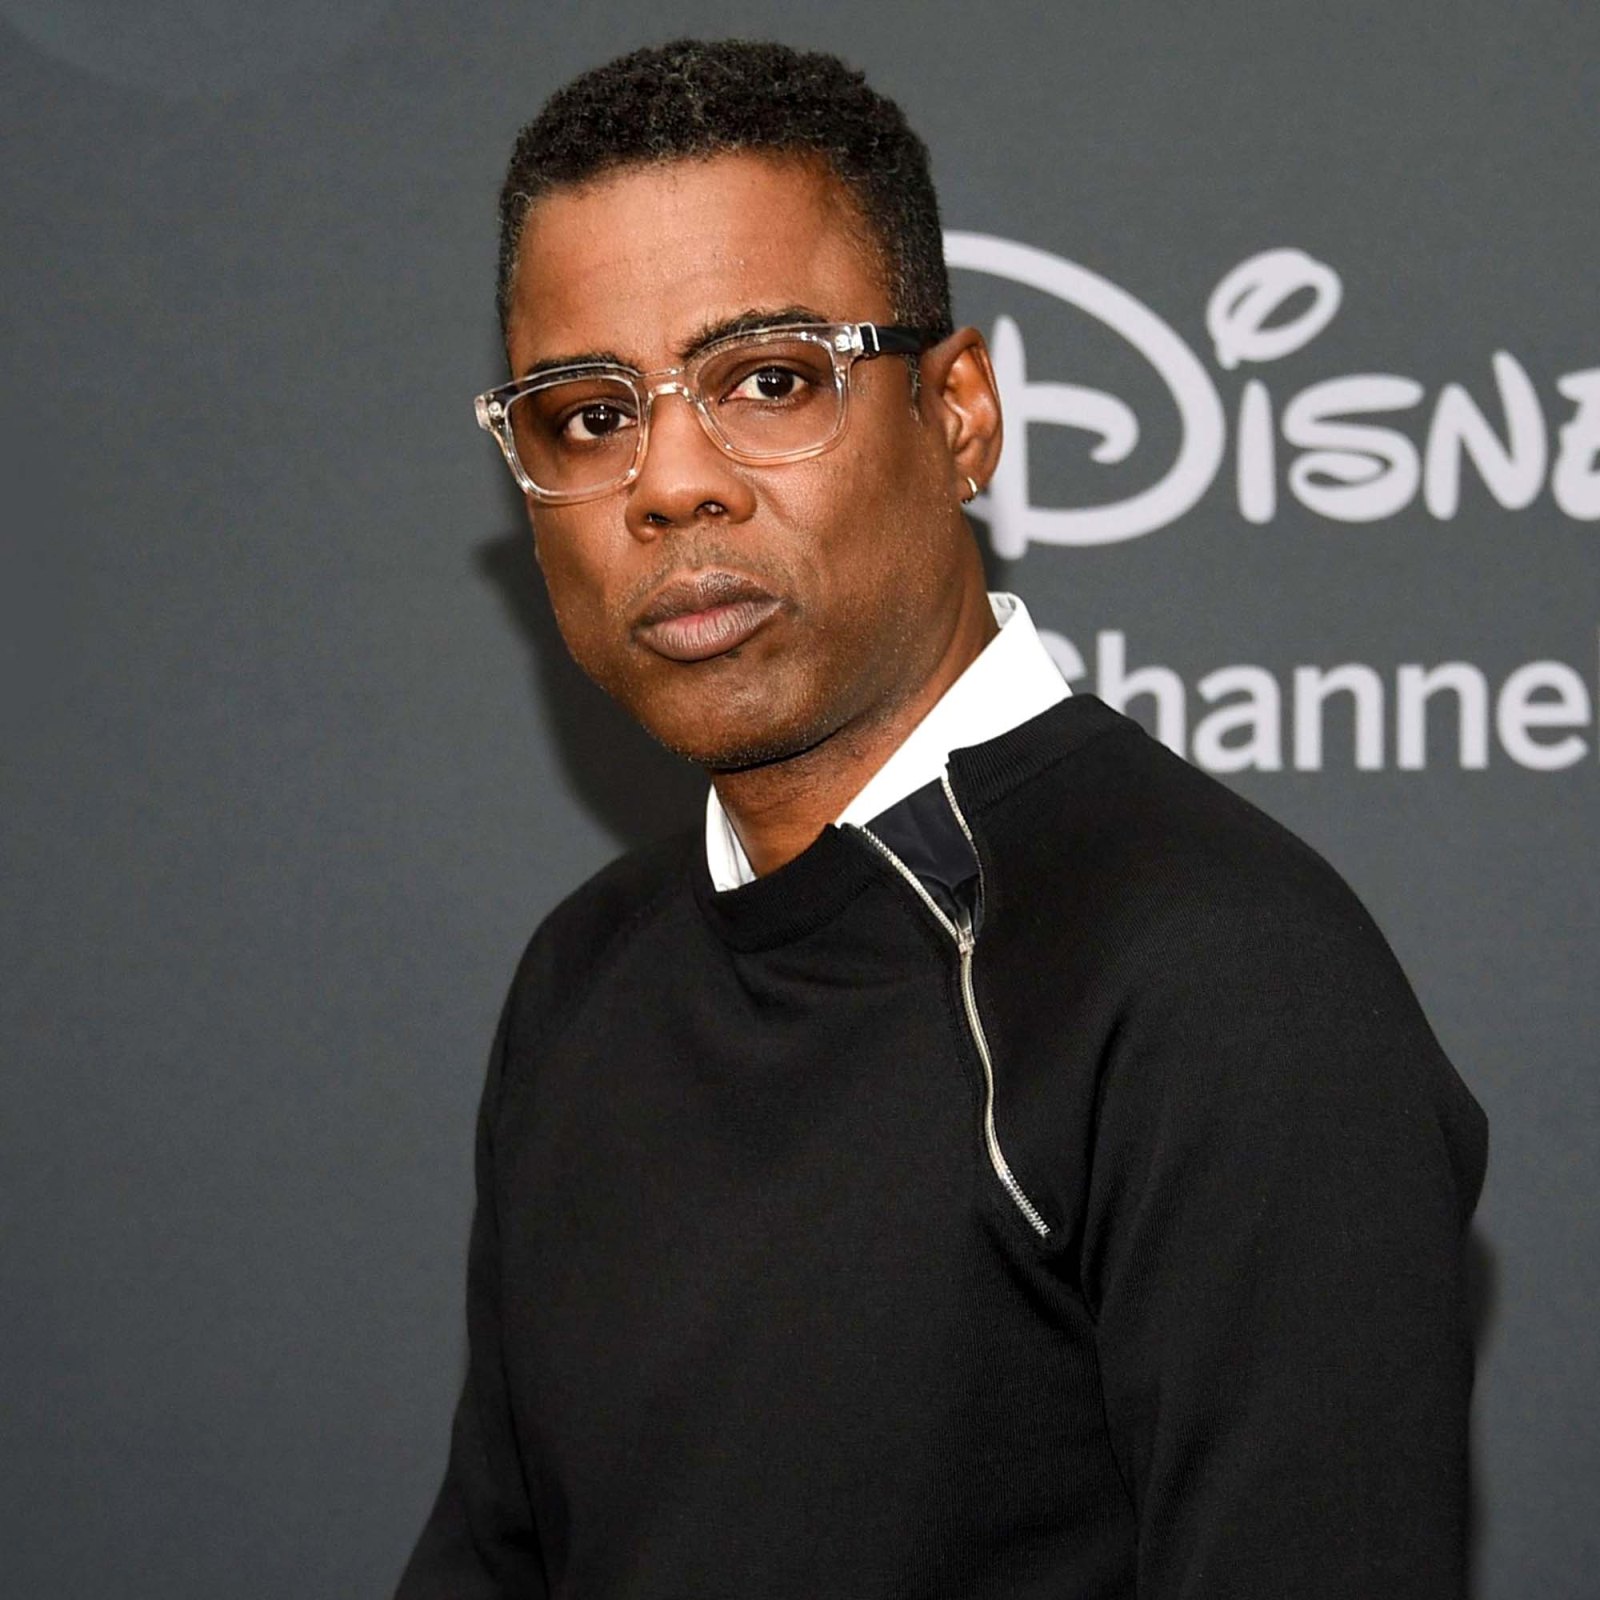 Celebs React Dave Chapelle Incident Chris Rock More